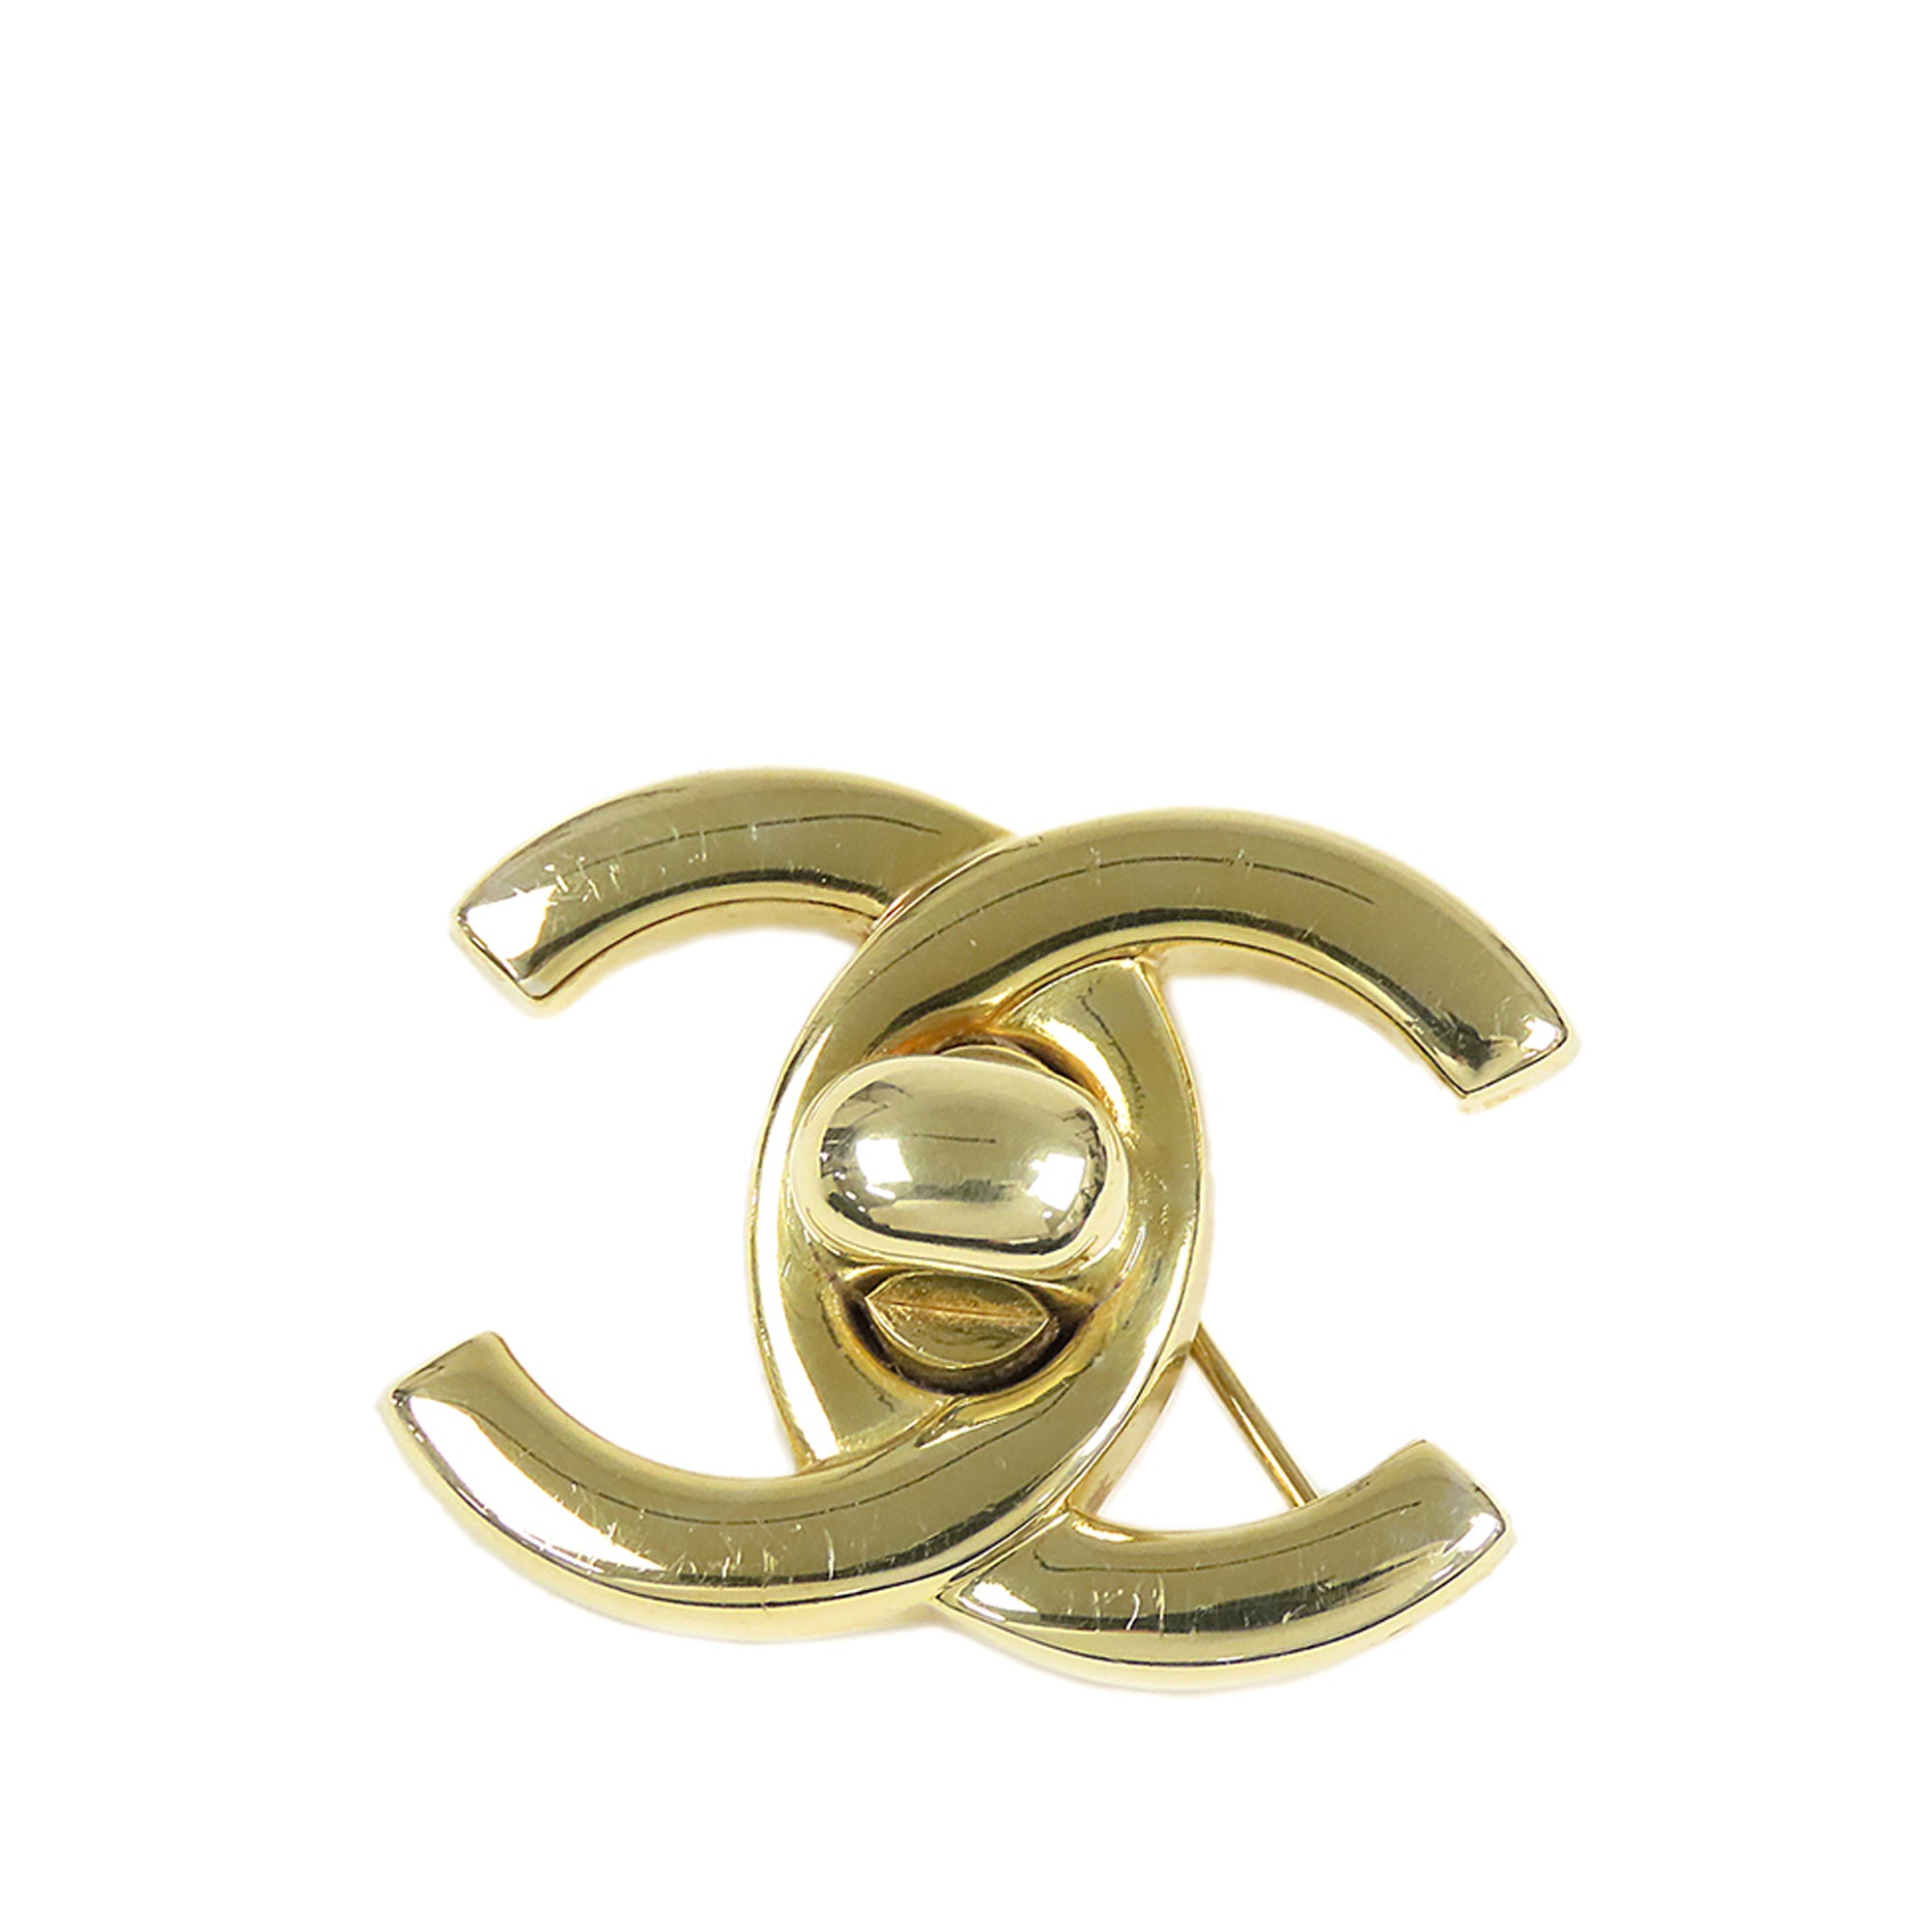 Chanel Cc Turnlock Clip-on Earrings (authentic Pre-owned) in Metallic